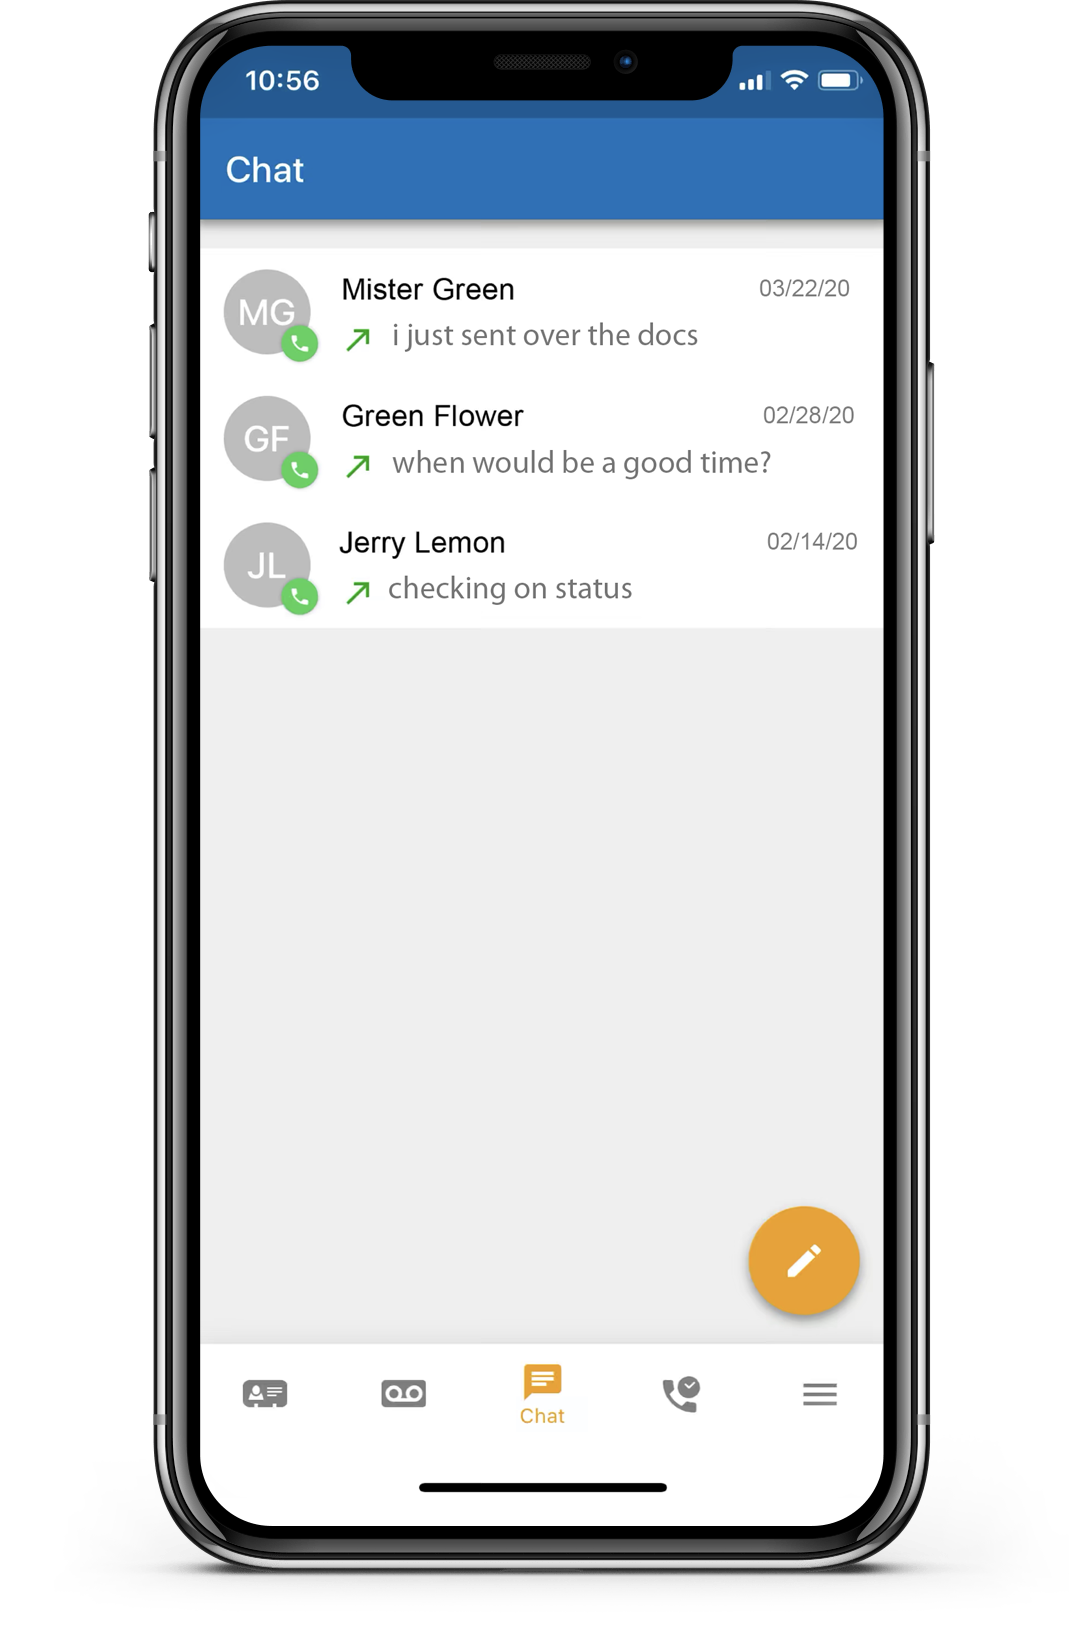 Tierzero App displaying chat interface